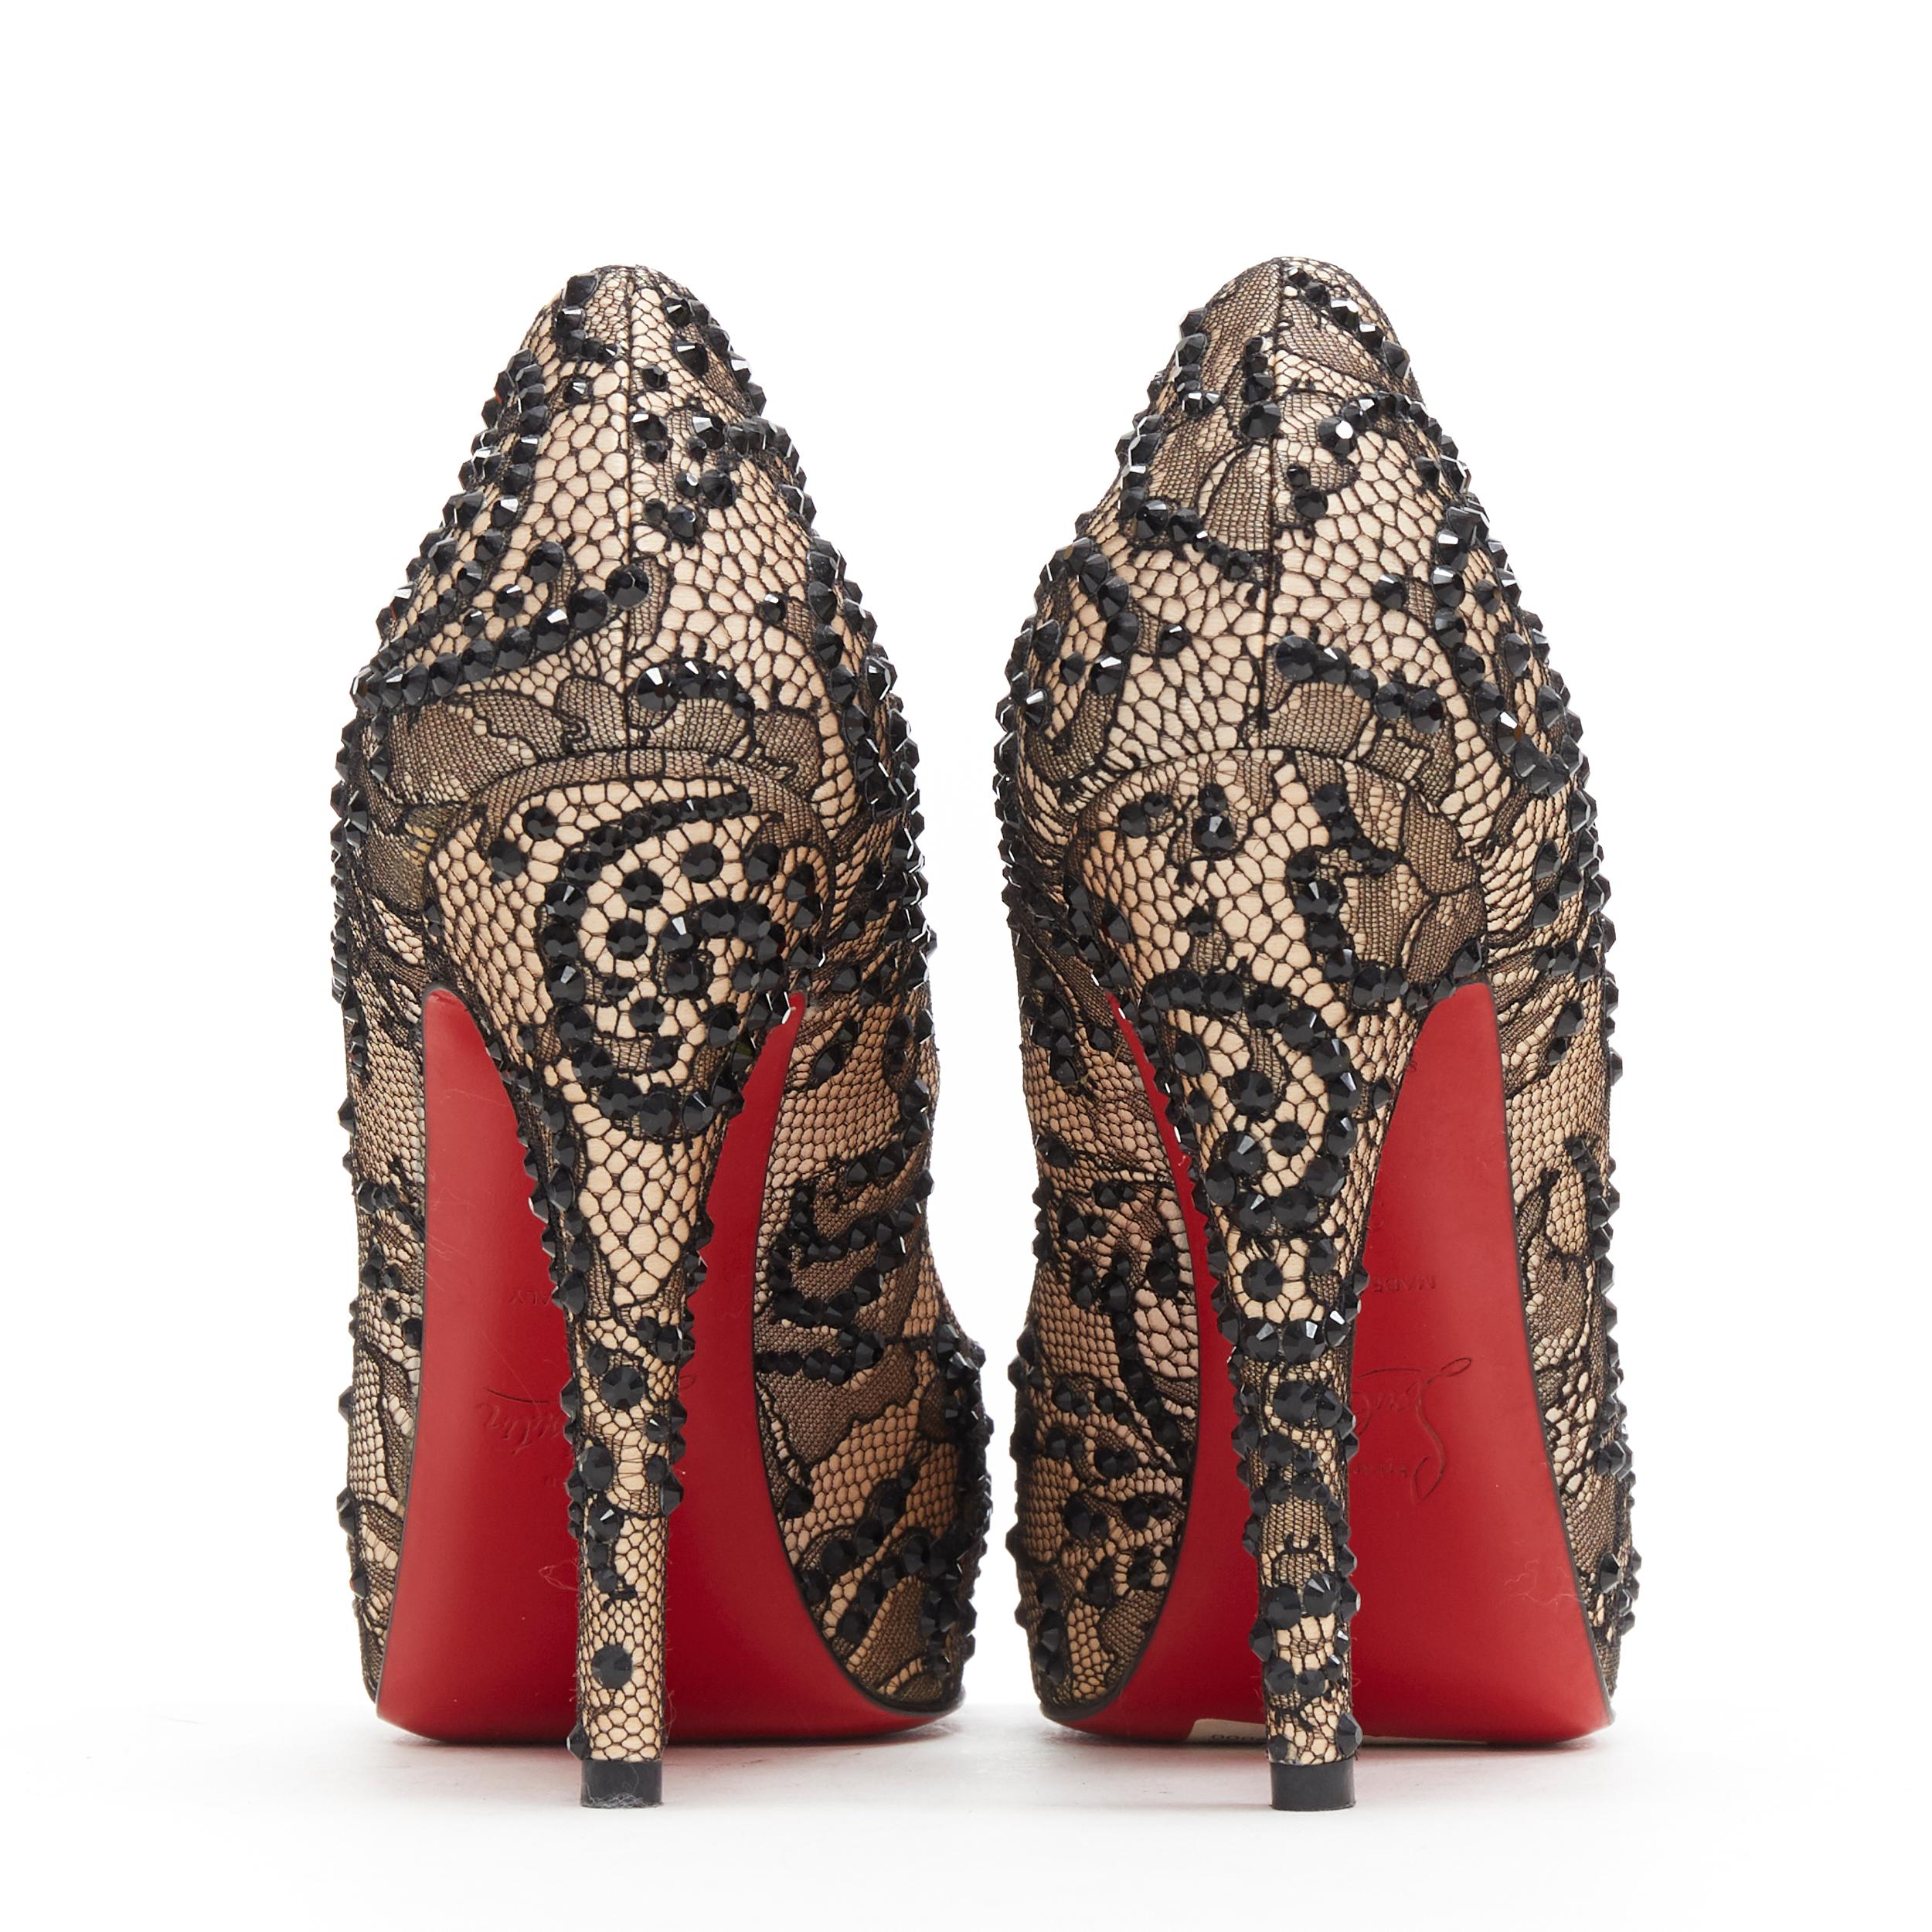 louboutin very prive sizing